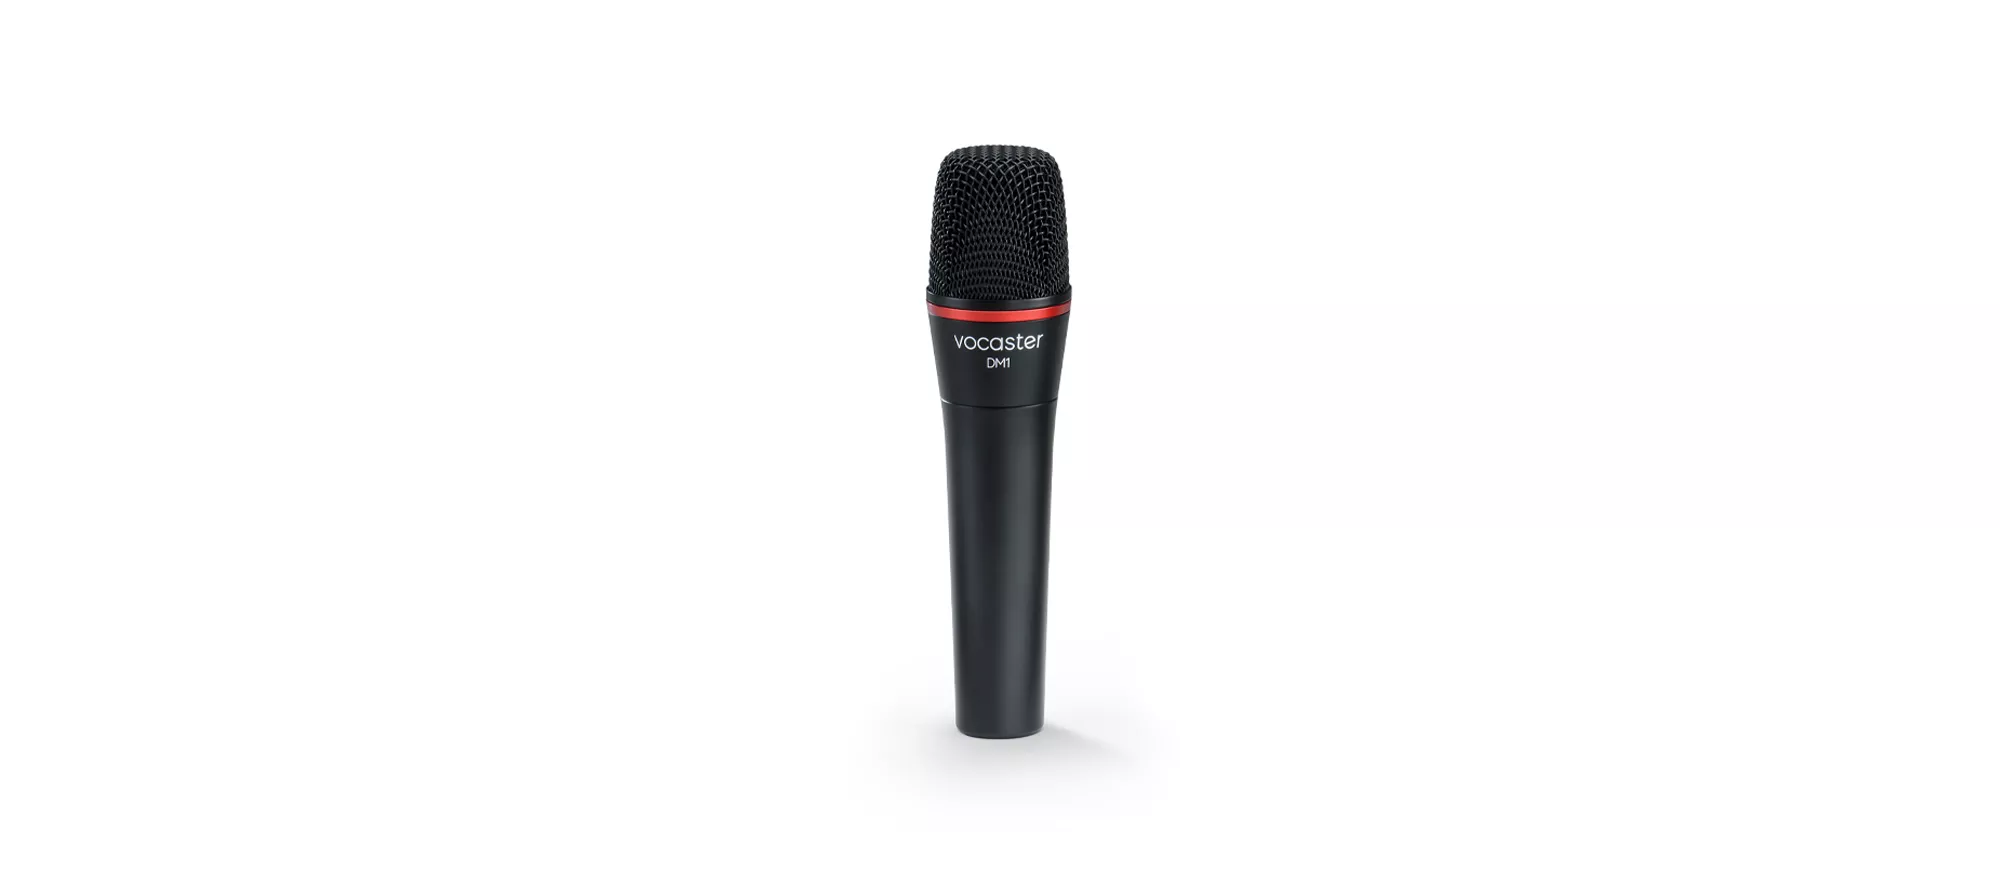 Image of a Vocaster DM1 microphone on a white background